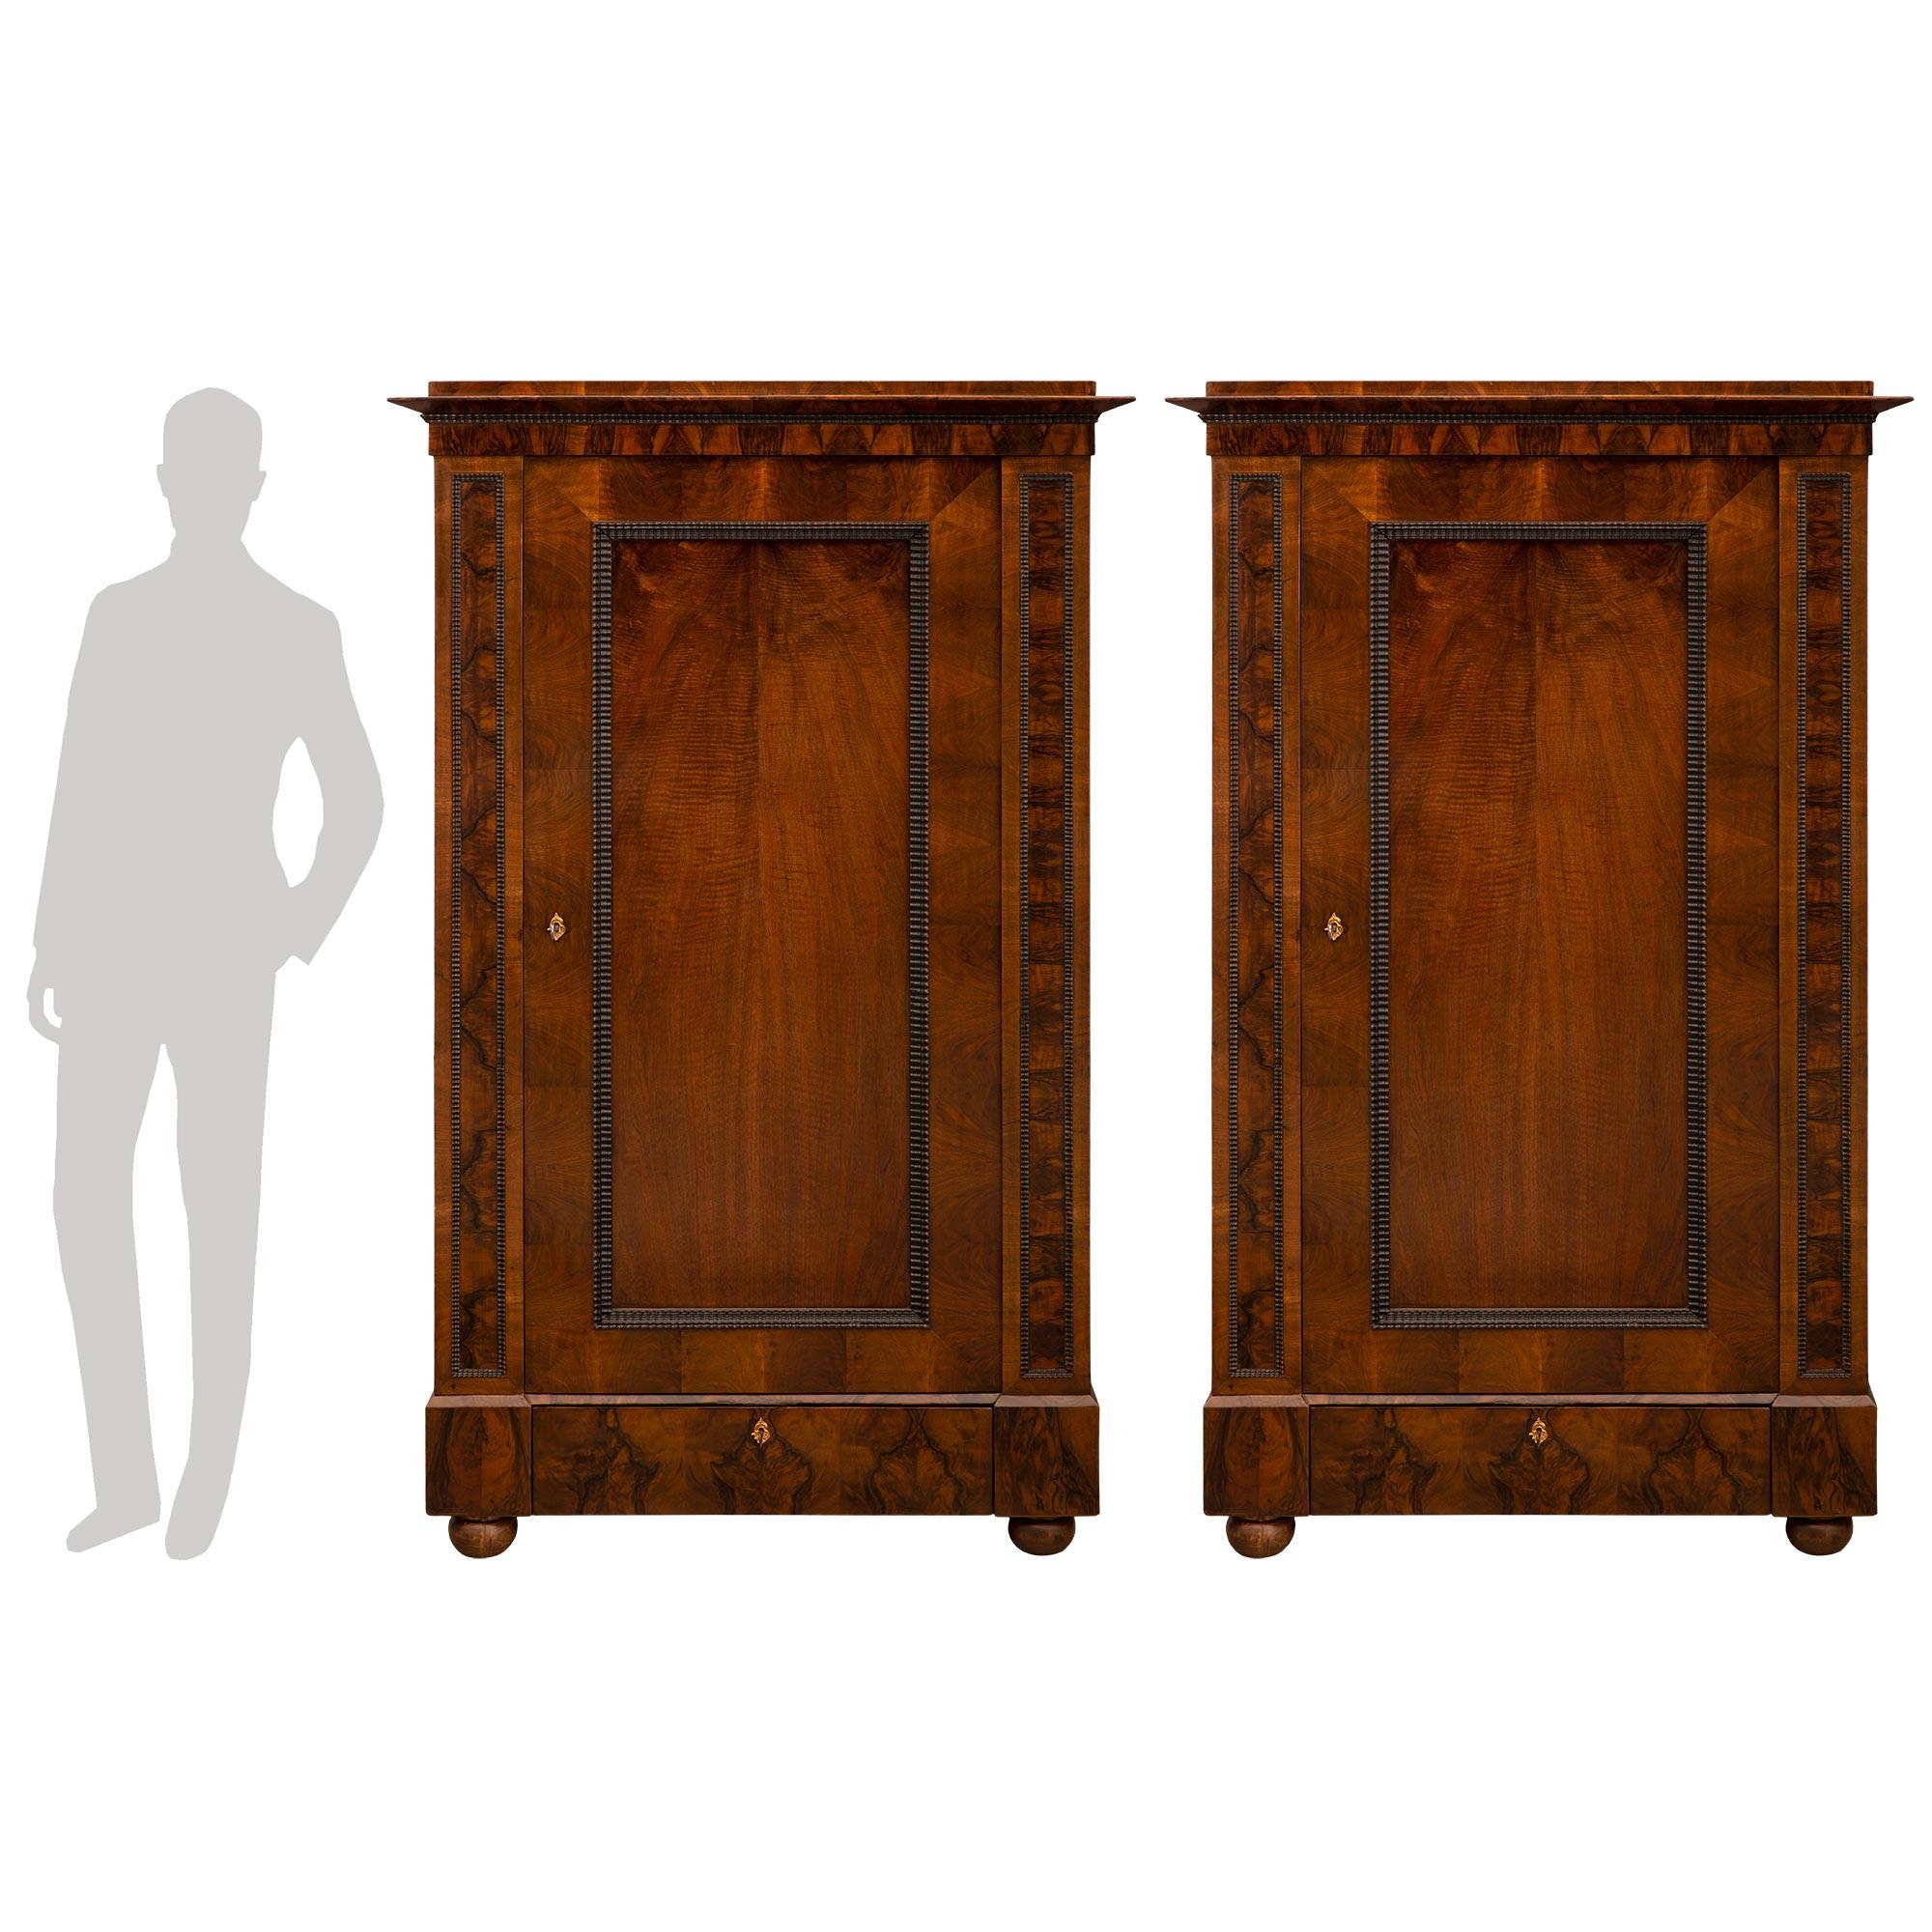 A striking and large scale pair of Continental early 19th century Neo-Classical st. Walnut and ebonized Fruitwood cabinets. Each cabinet is raised by four elegant walnut bun feet below a straight frieze with a single drawer decorated with an ormolu